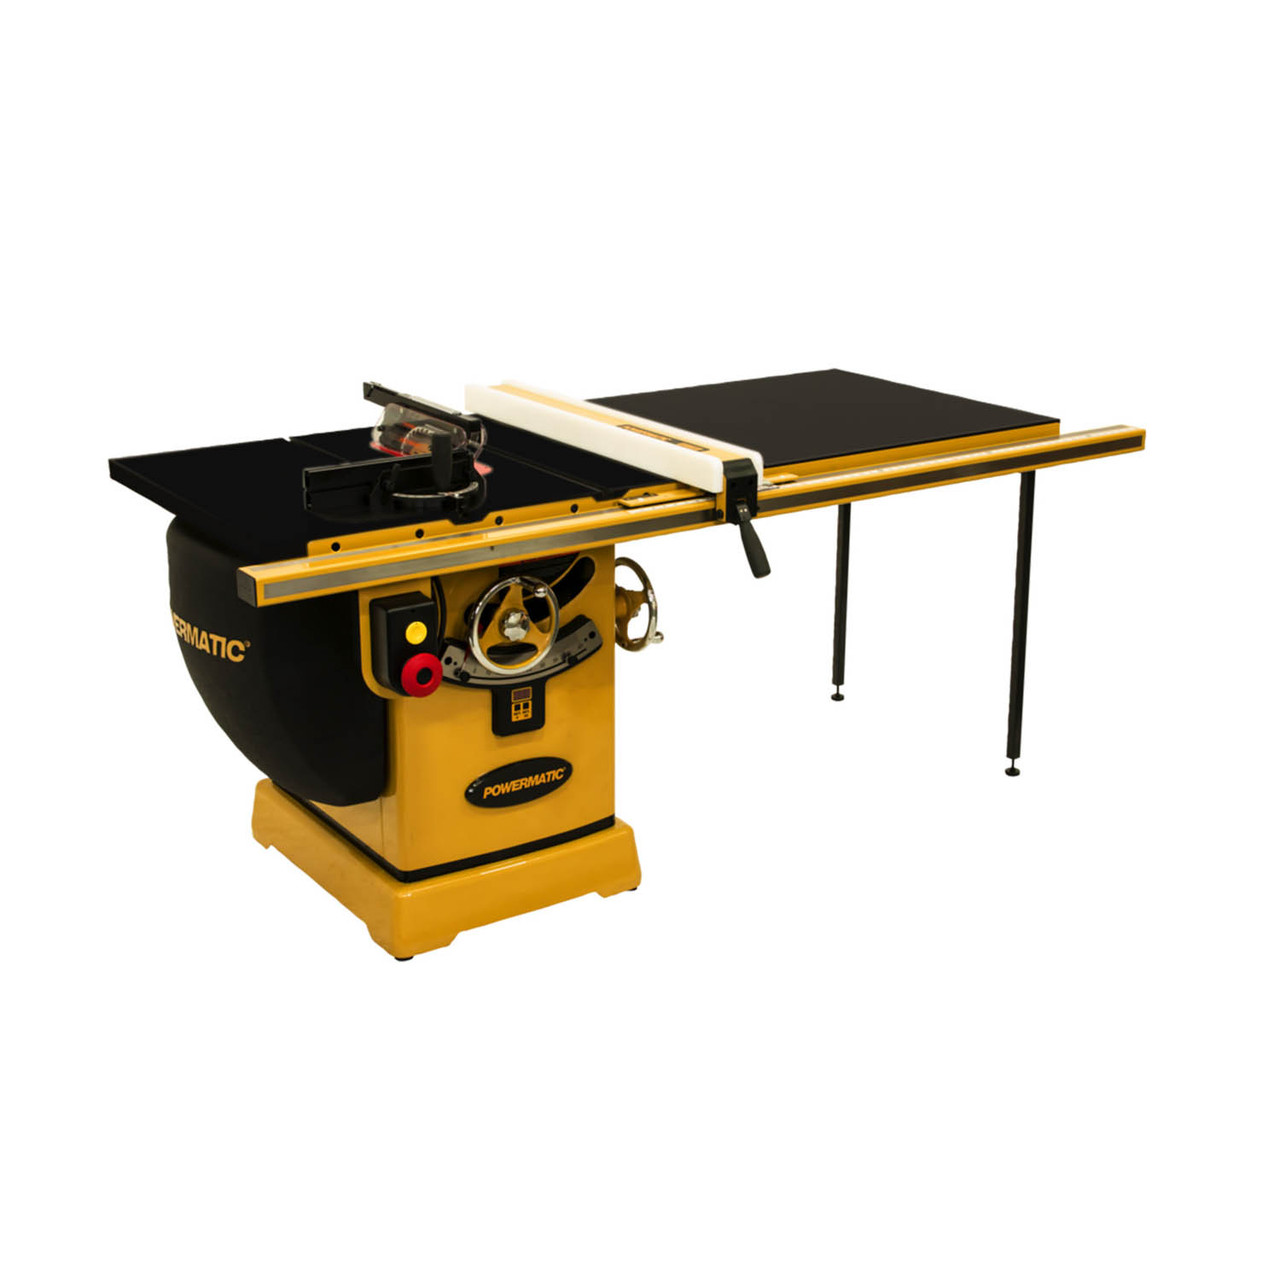 Powermatic, PM1-PM25150KT, PM2000T 10" Table Saw with ArmorGlide, 5HP 1PH 230V, 50" RIP